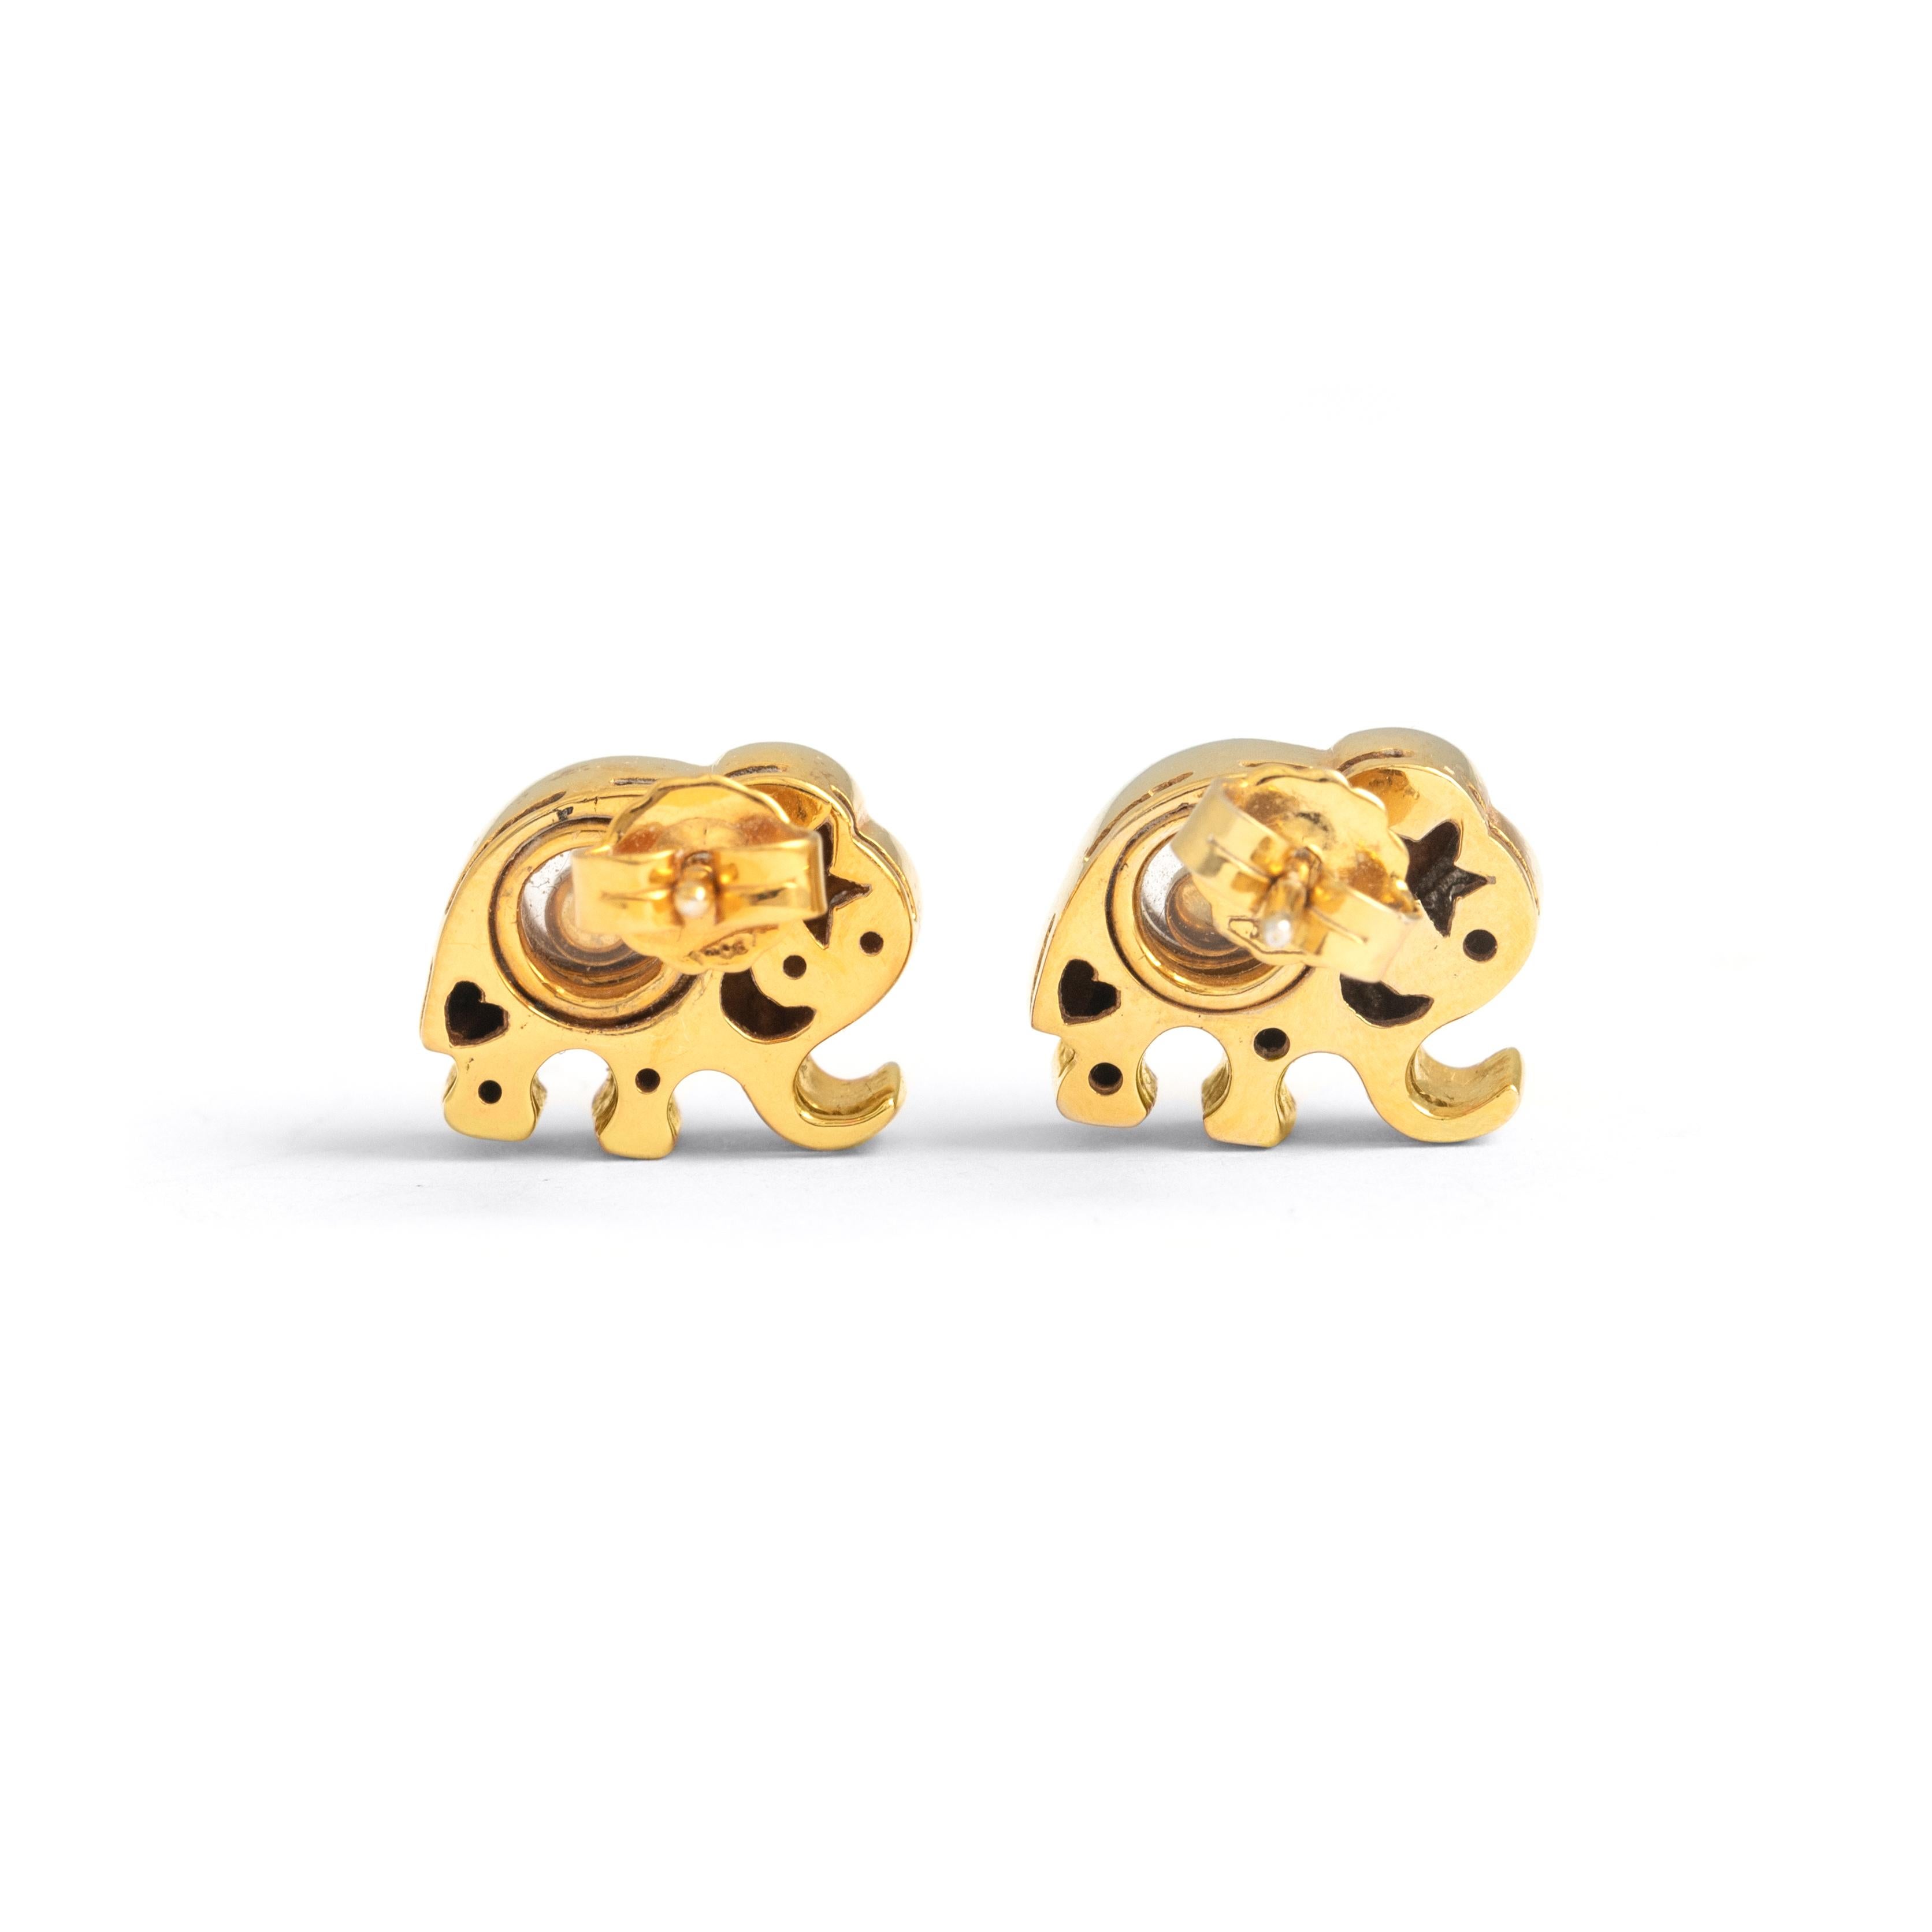 Elephant design, Diamond on Yellow Gold 18K Earrings.
Dancing diamonds gently moving and twirling between two crystals.
Size: 1.40 centimeters x 1.20 centimeters.

Total weight: 9.57 grams.
